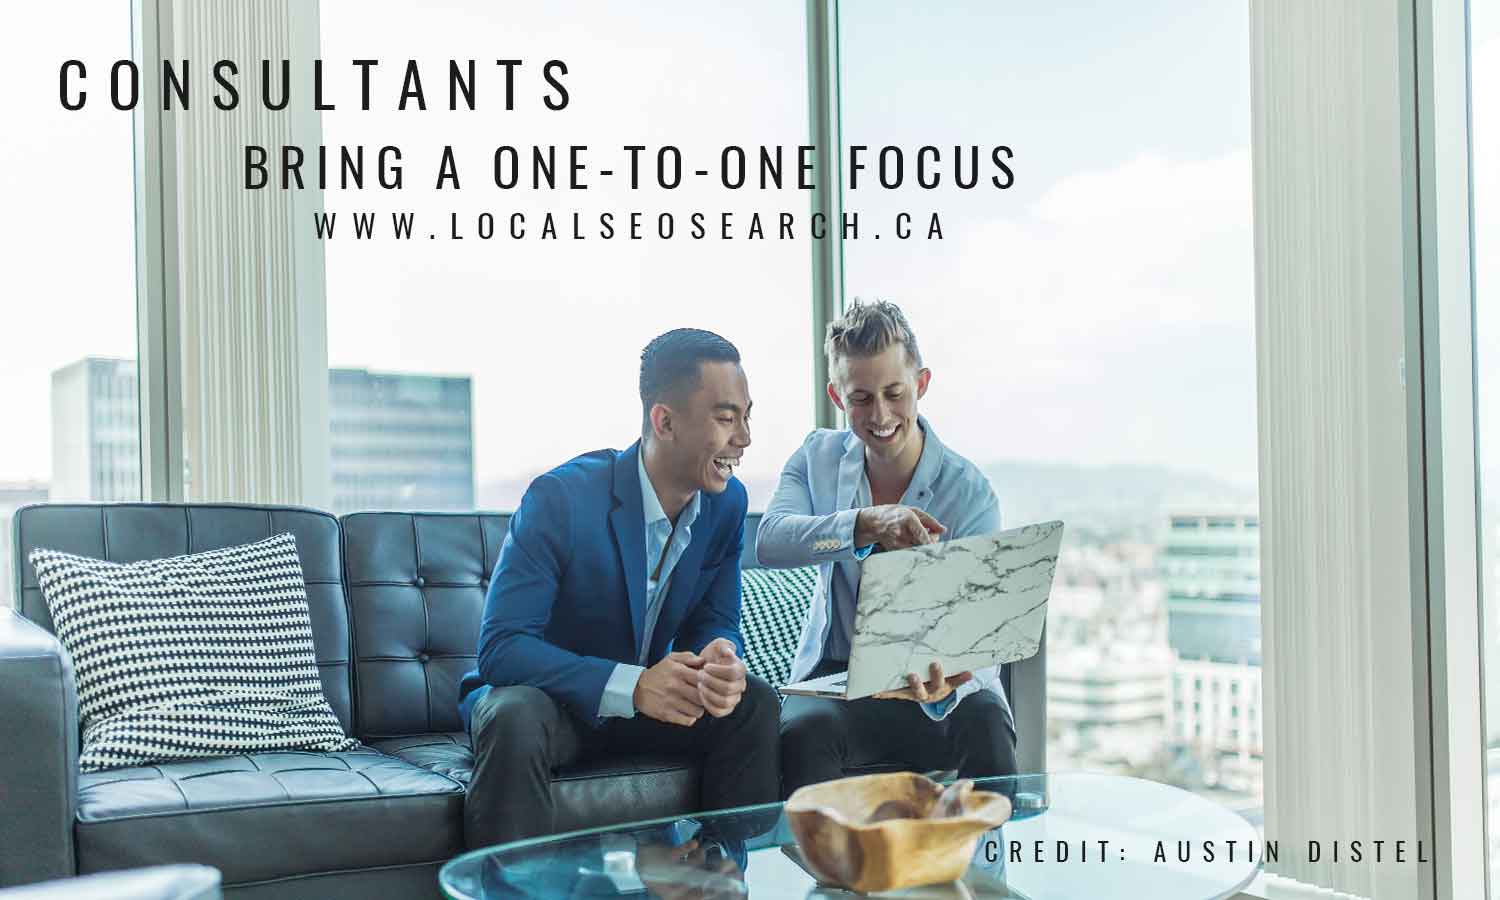 Consultants bring a one-to-one focus